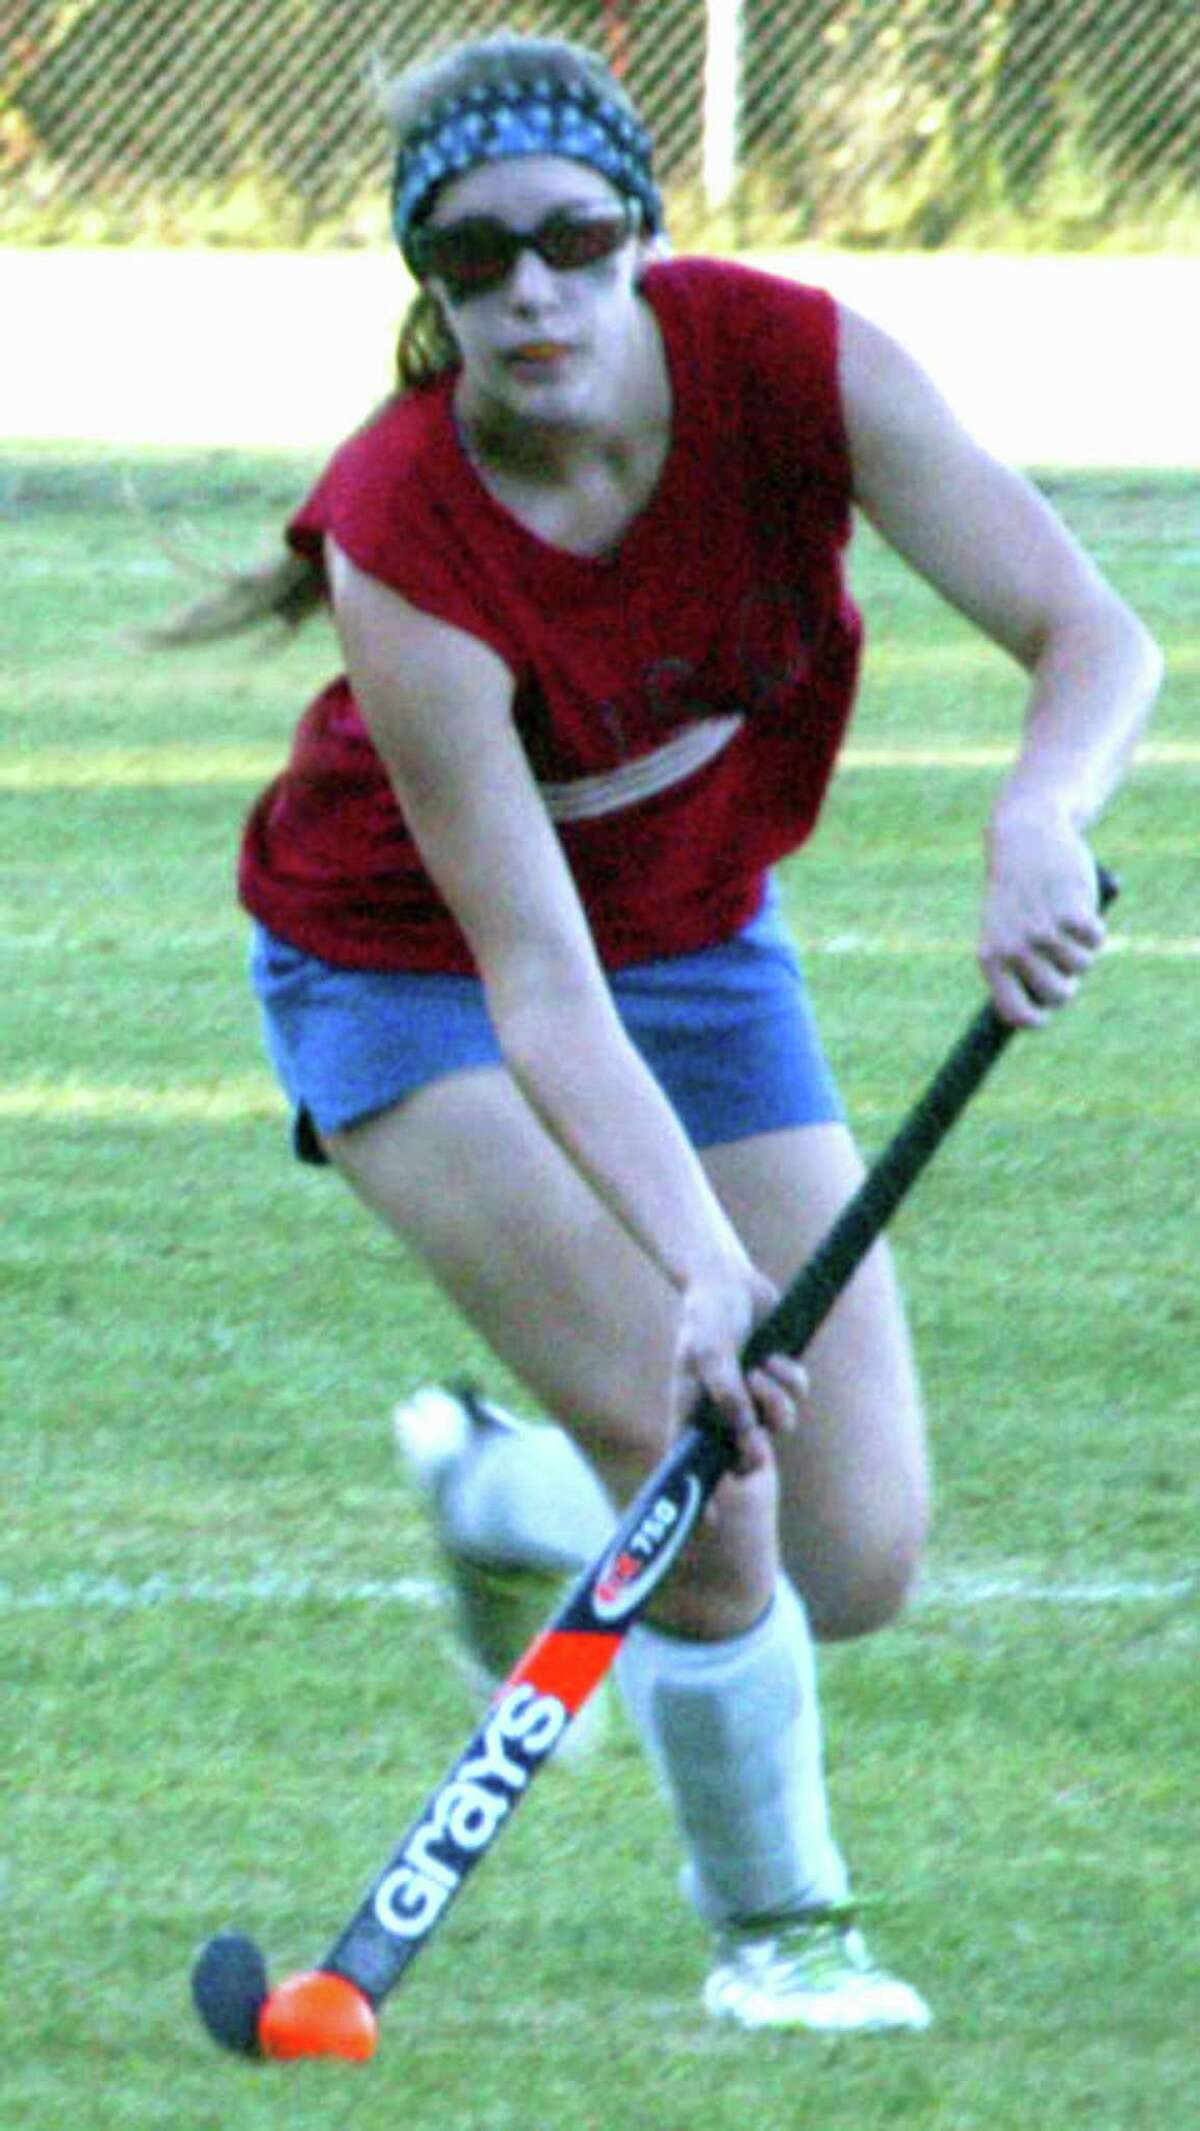 The Green Wave's Natalie Capriglione studies the field before making a pass during pre-season for New Milford High School field hockey, September 2013